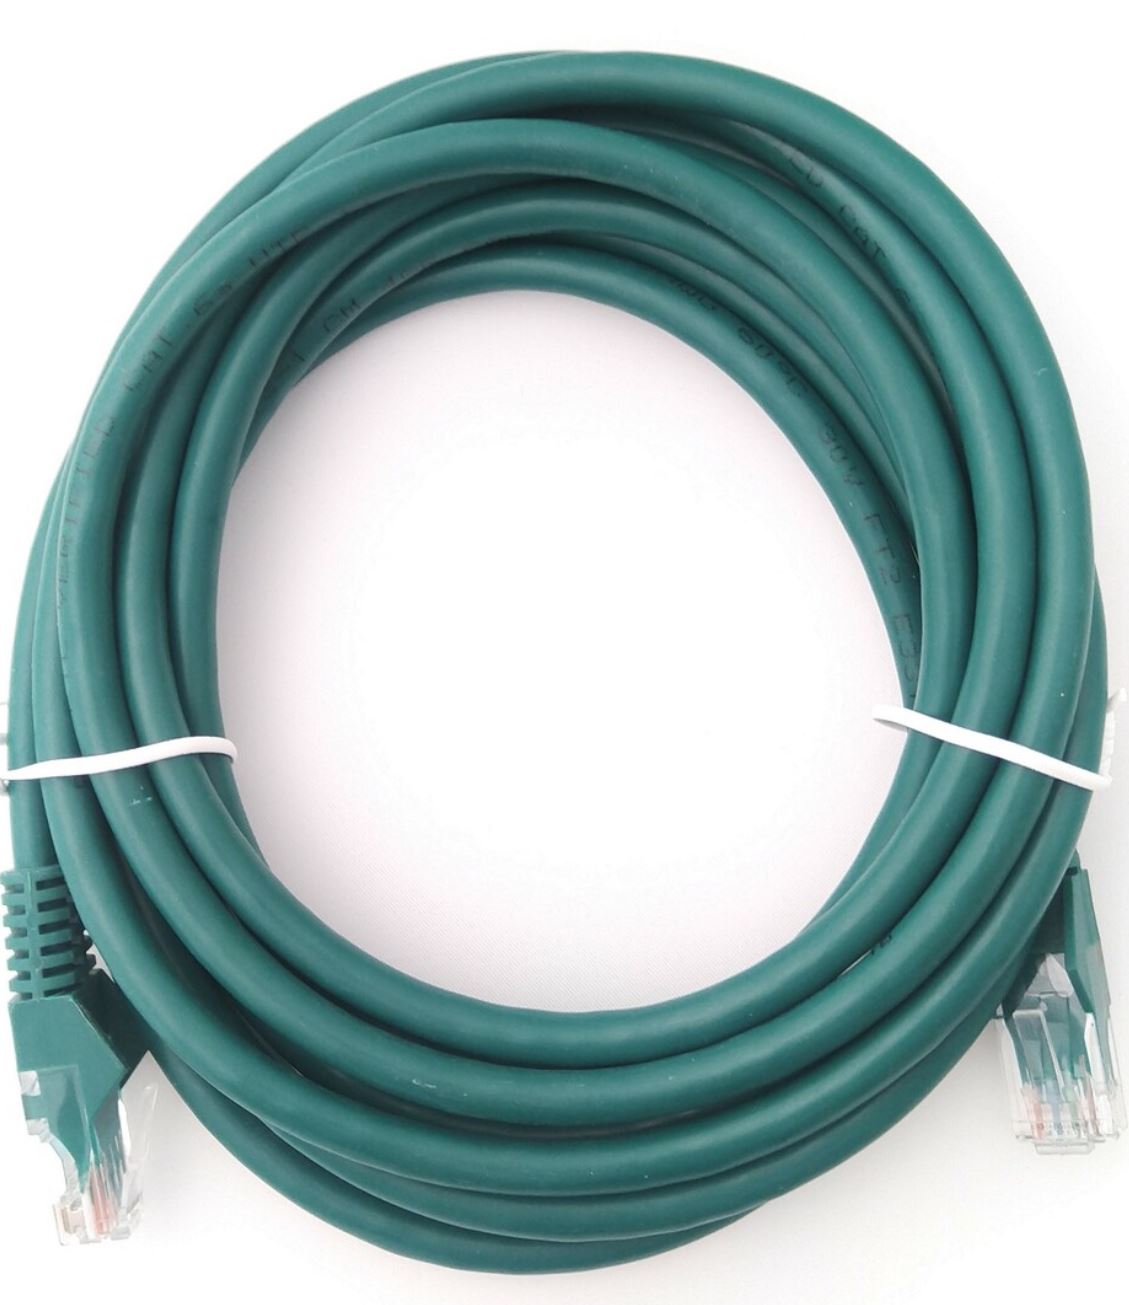 0.25m UTP Ethernet Cable (Green, Cat 6A)